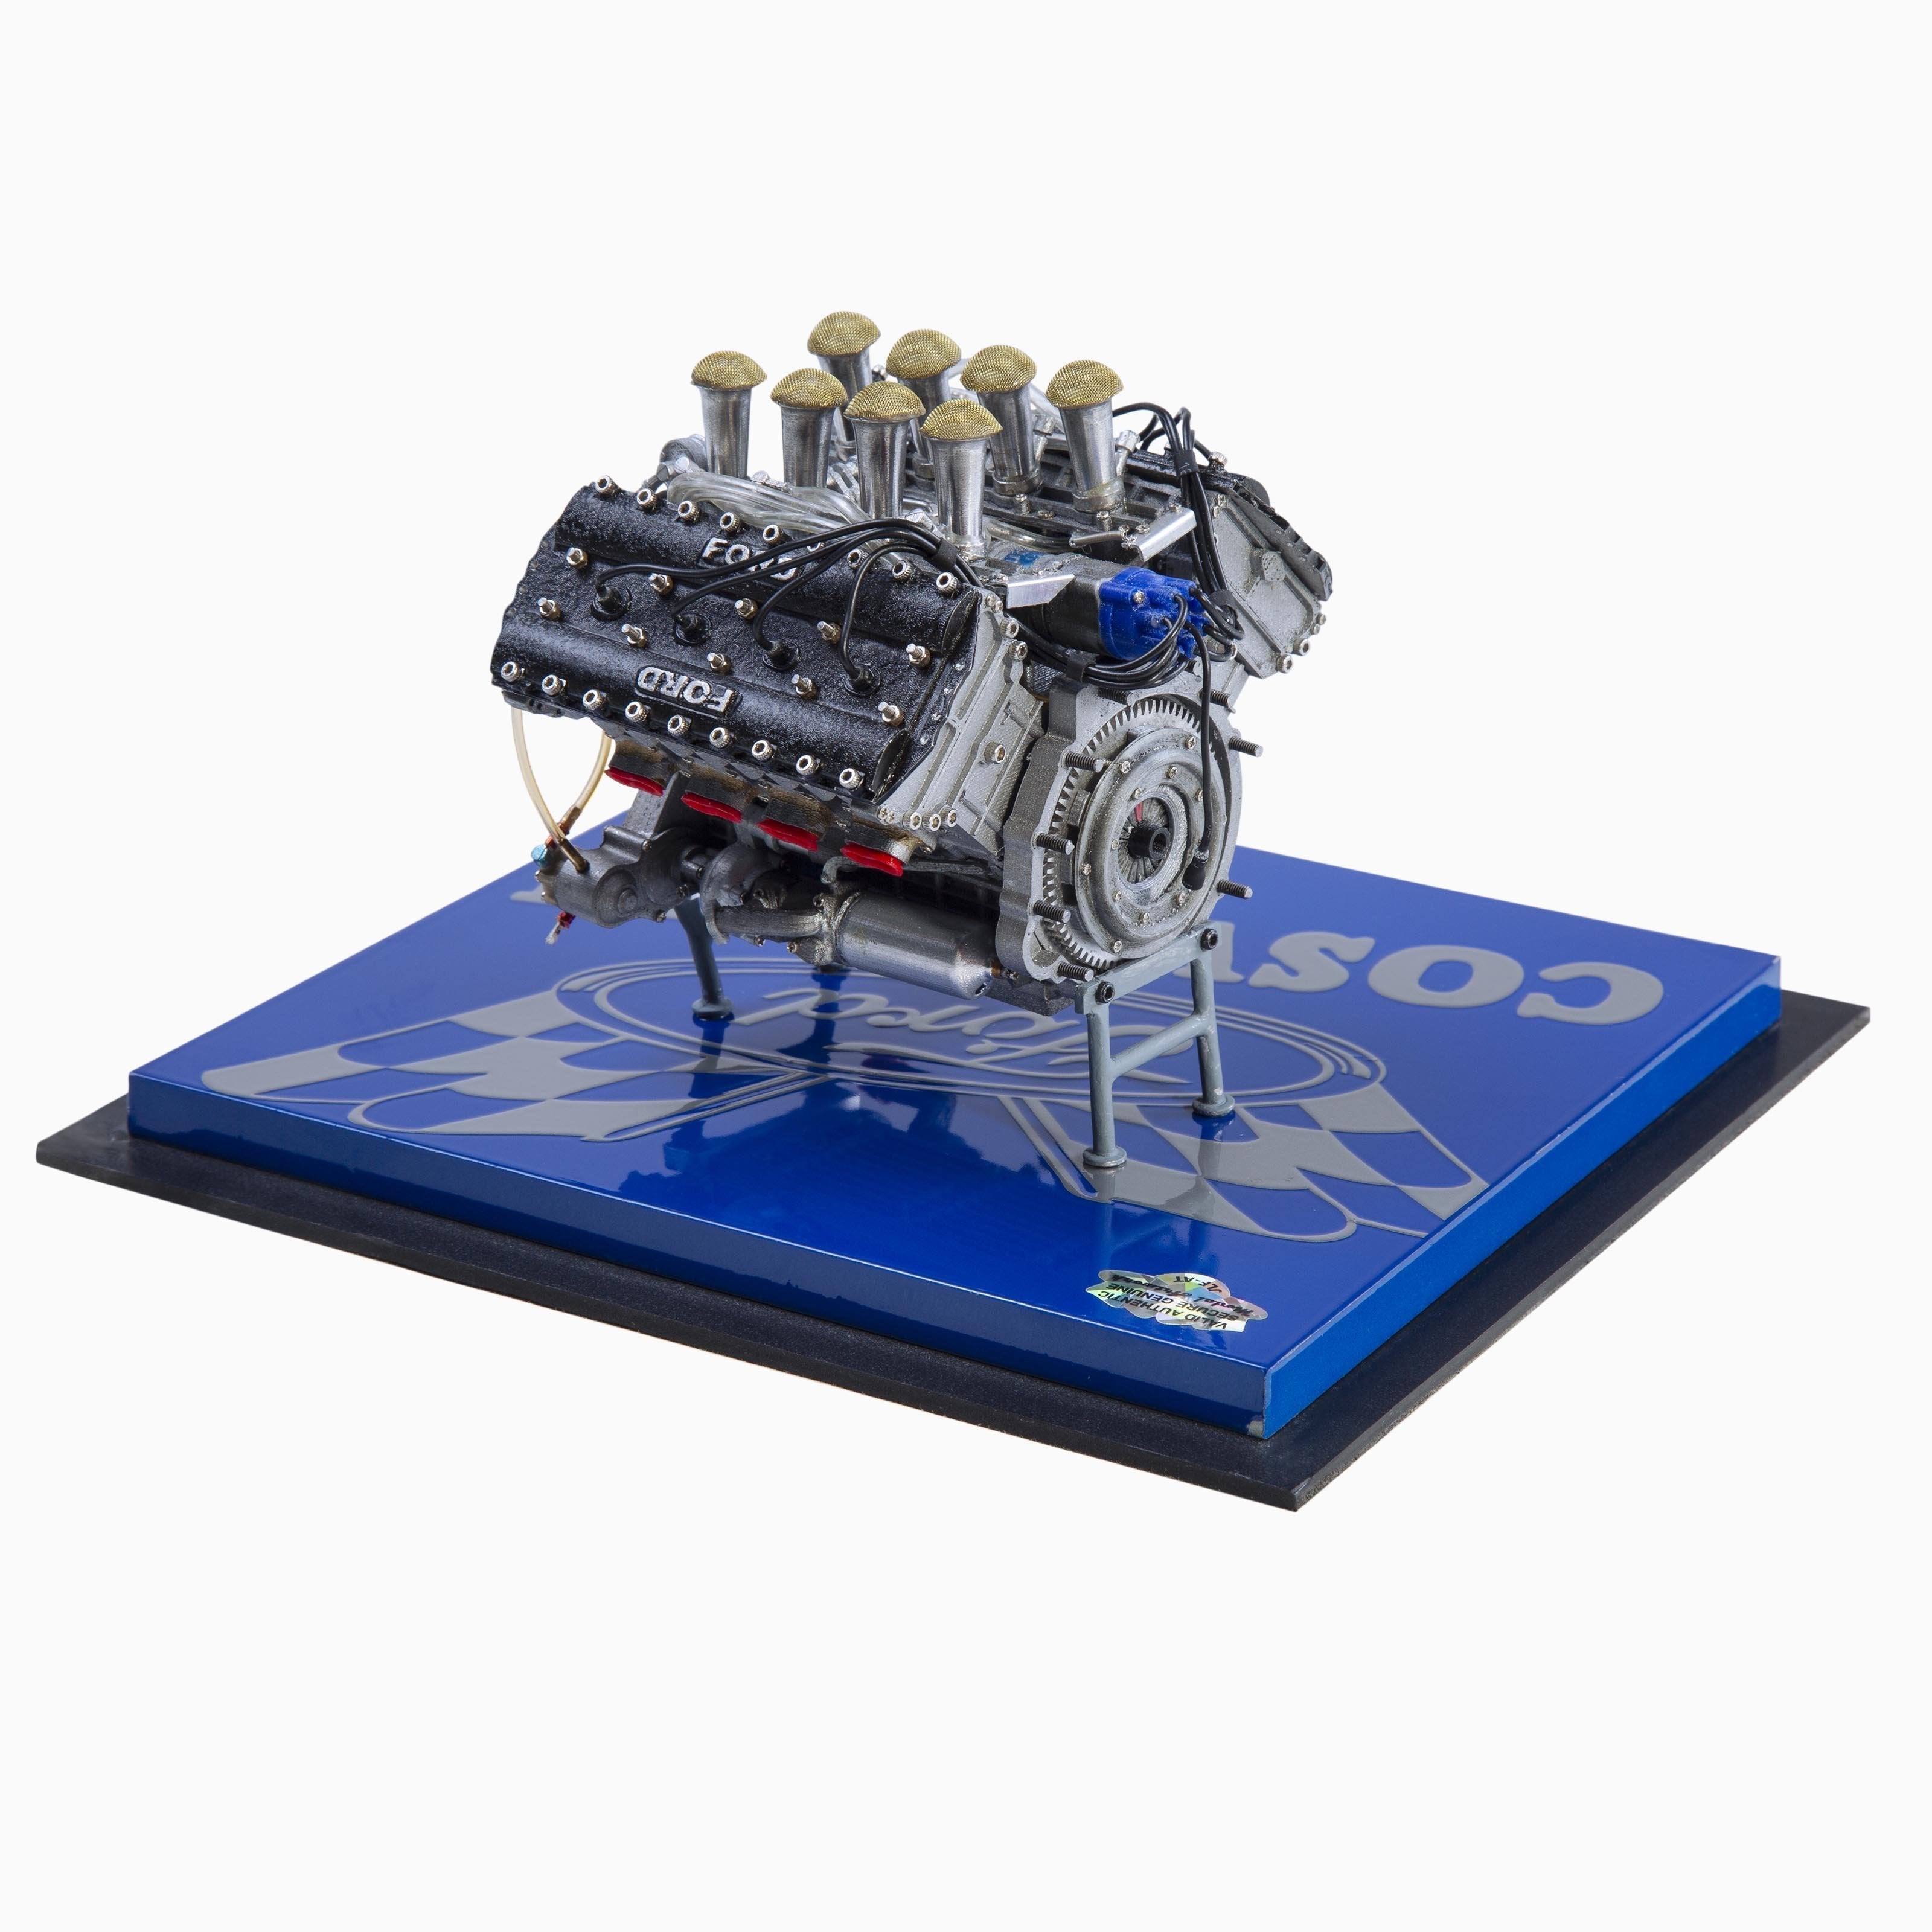 Cosworth DFV Engine-Scale Model-GPX Store -gpx-store